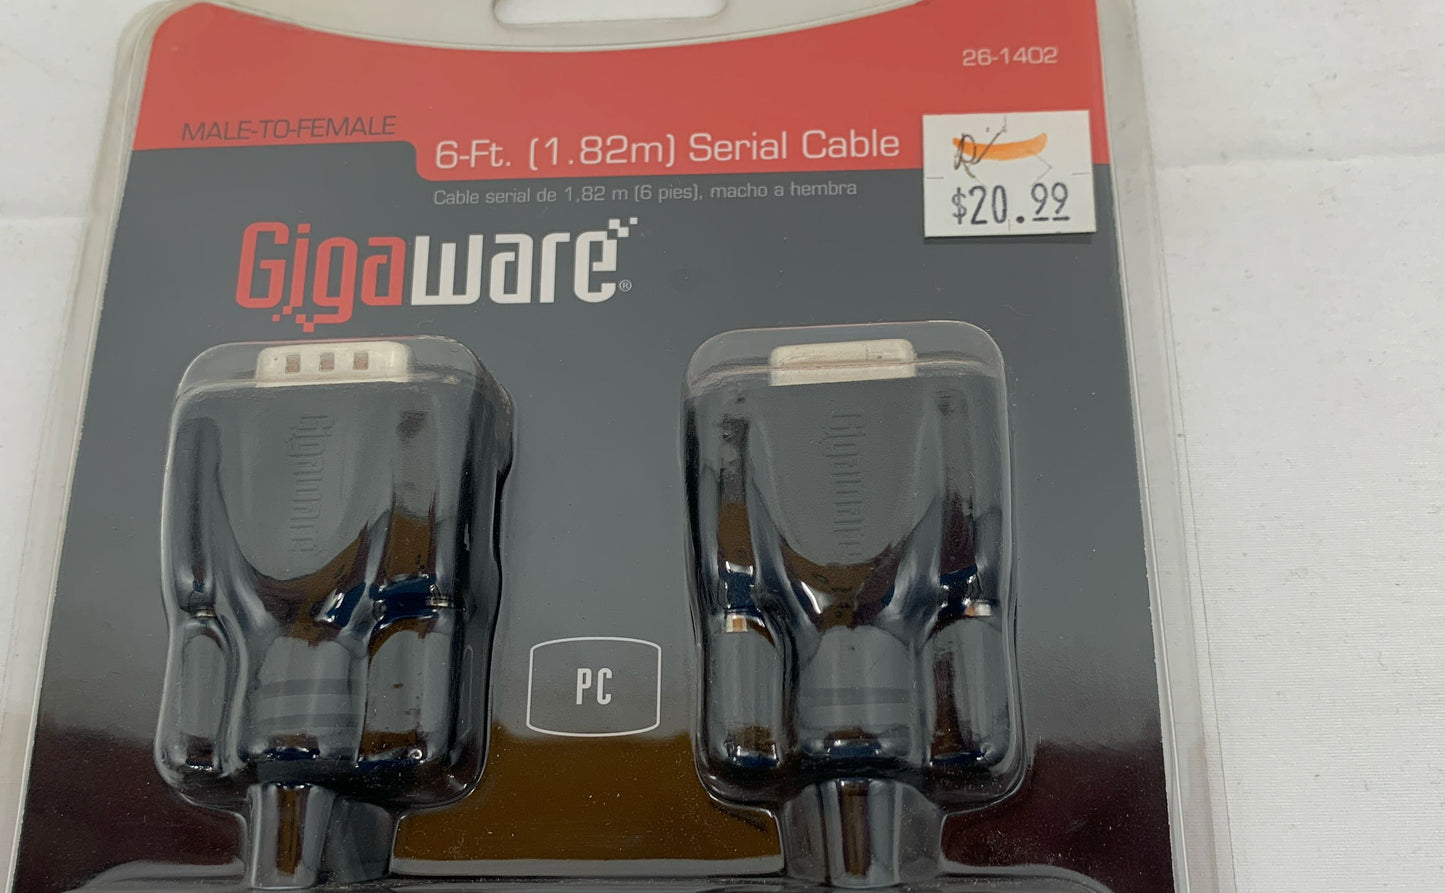 Gigaware 6 Ft Serial Cable And Enercell Wall Charger For iPhone And iPad